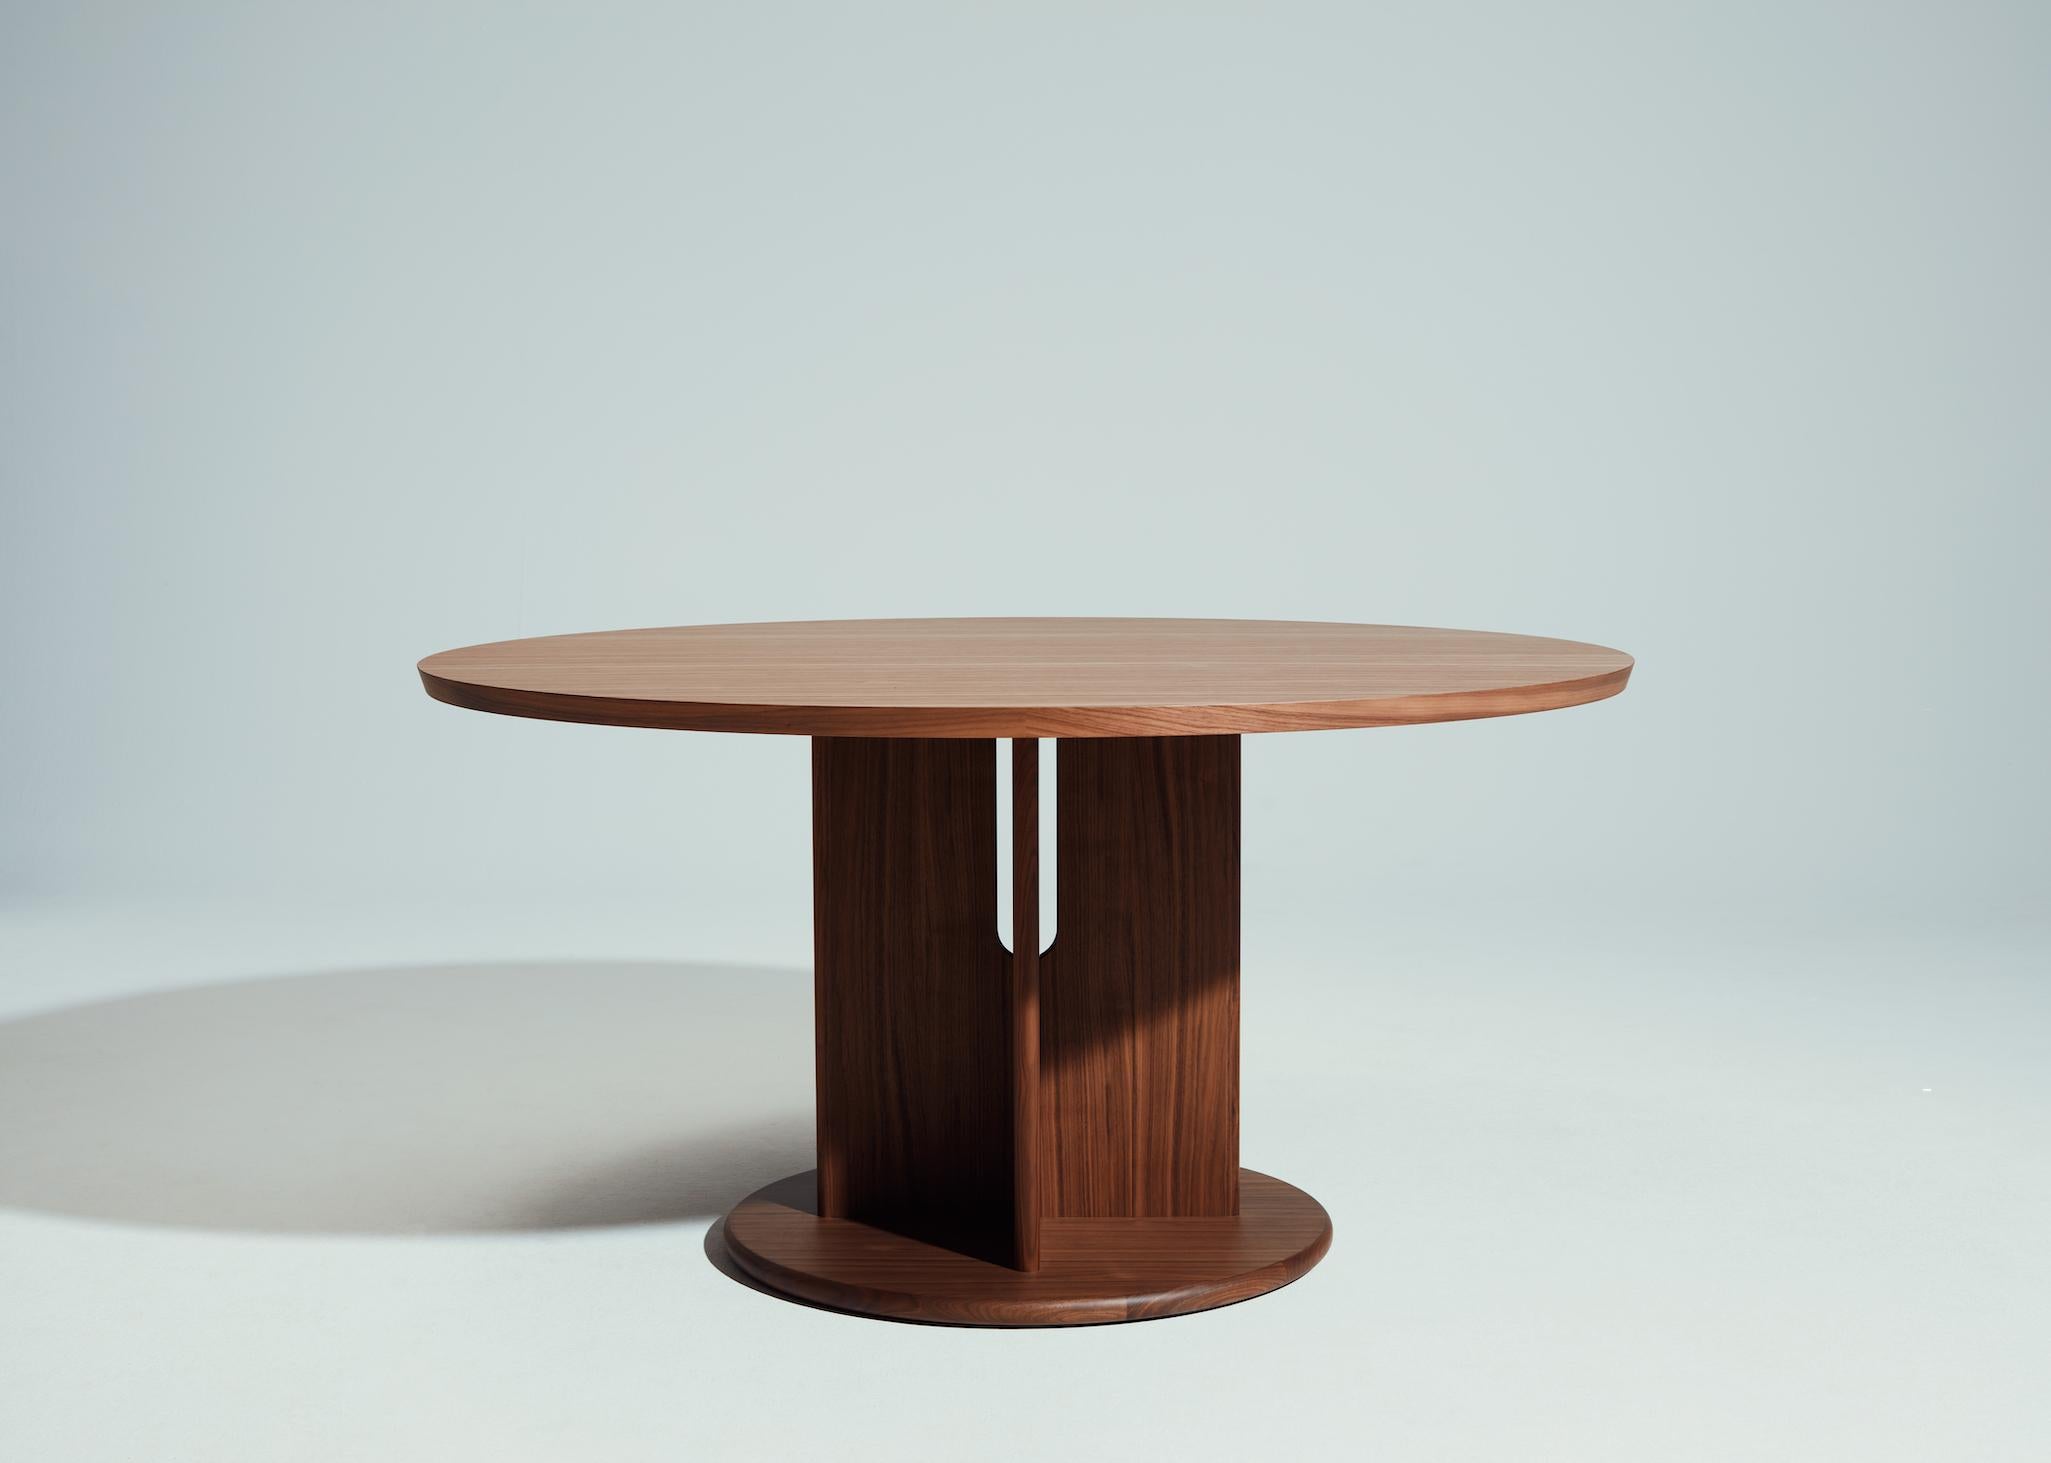 La Manufacture-Paris Intersection Canaletto Walnut Oval Table by Neri & Hu For Sale 2